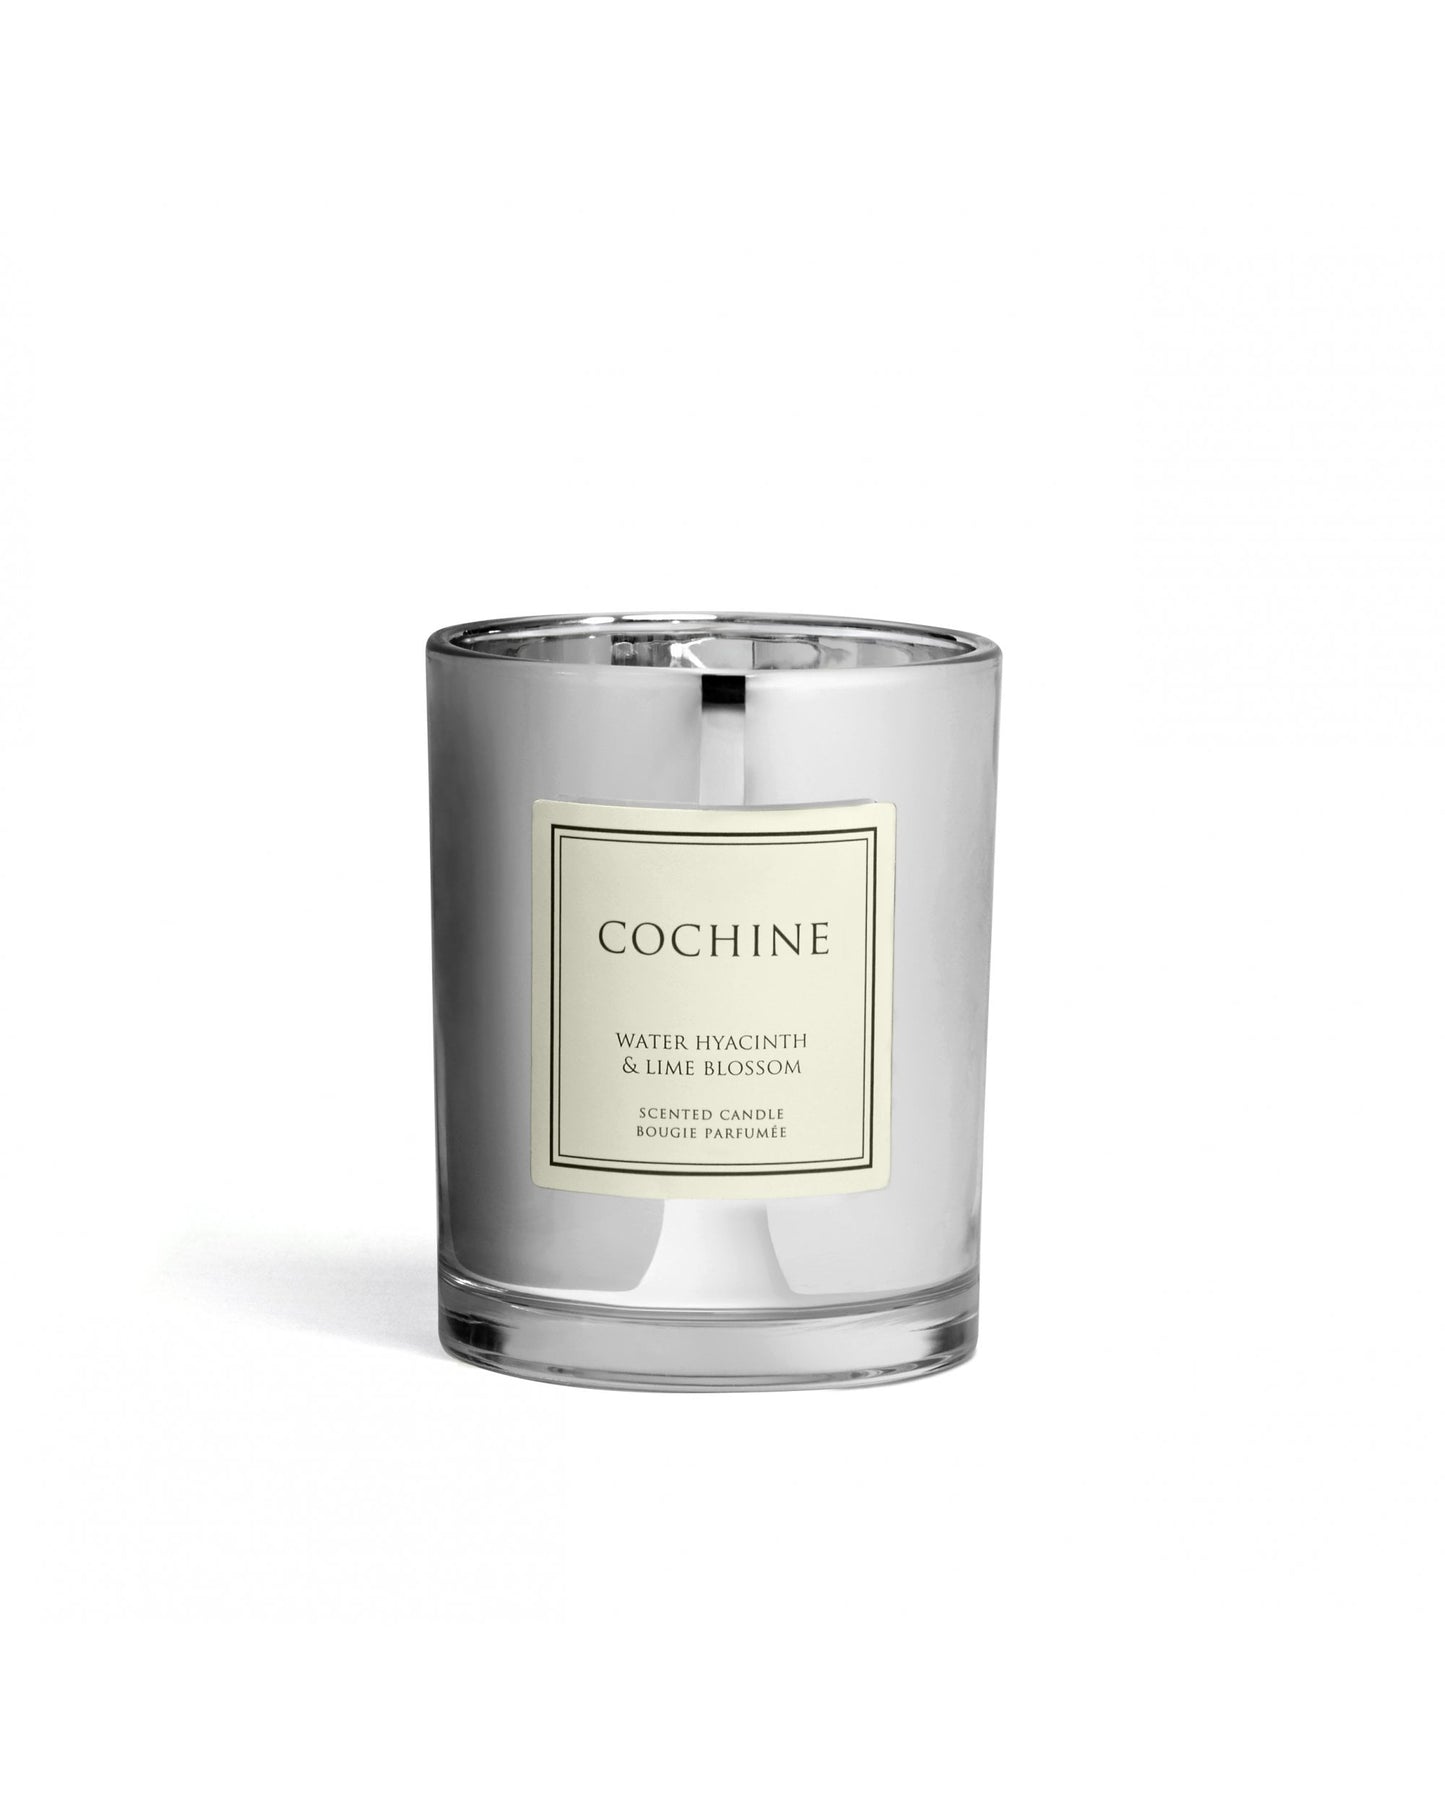 Water Hyacinth & Lime Blossom Scented Candle